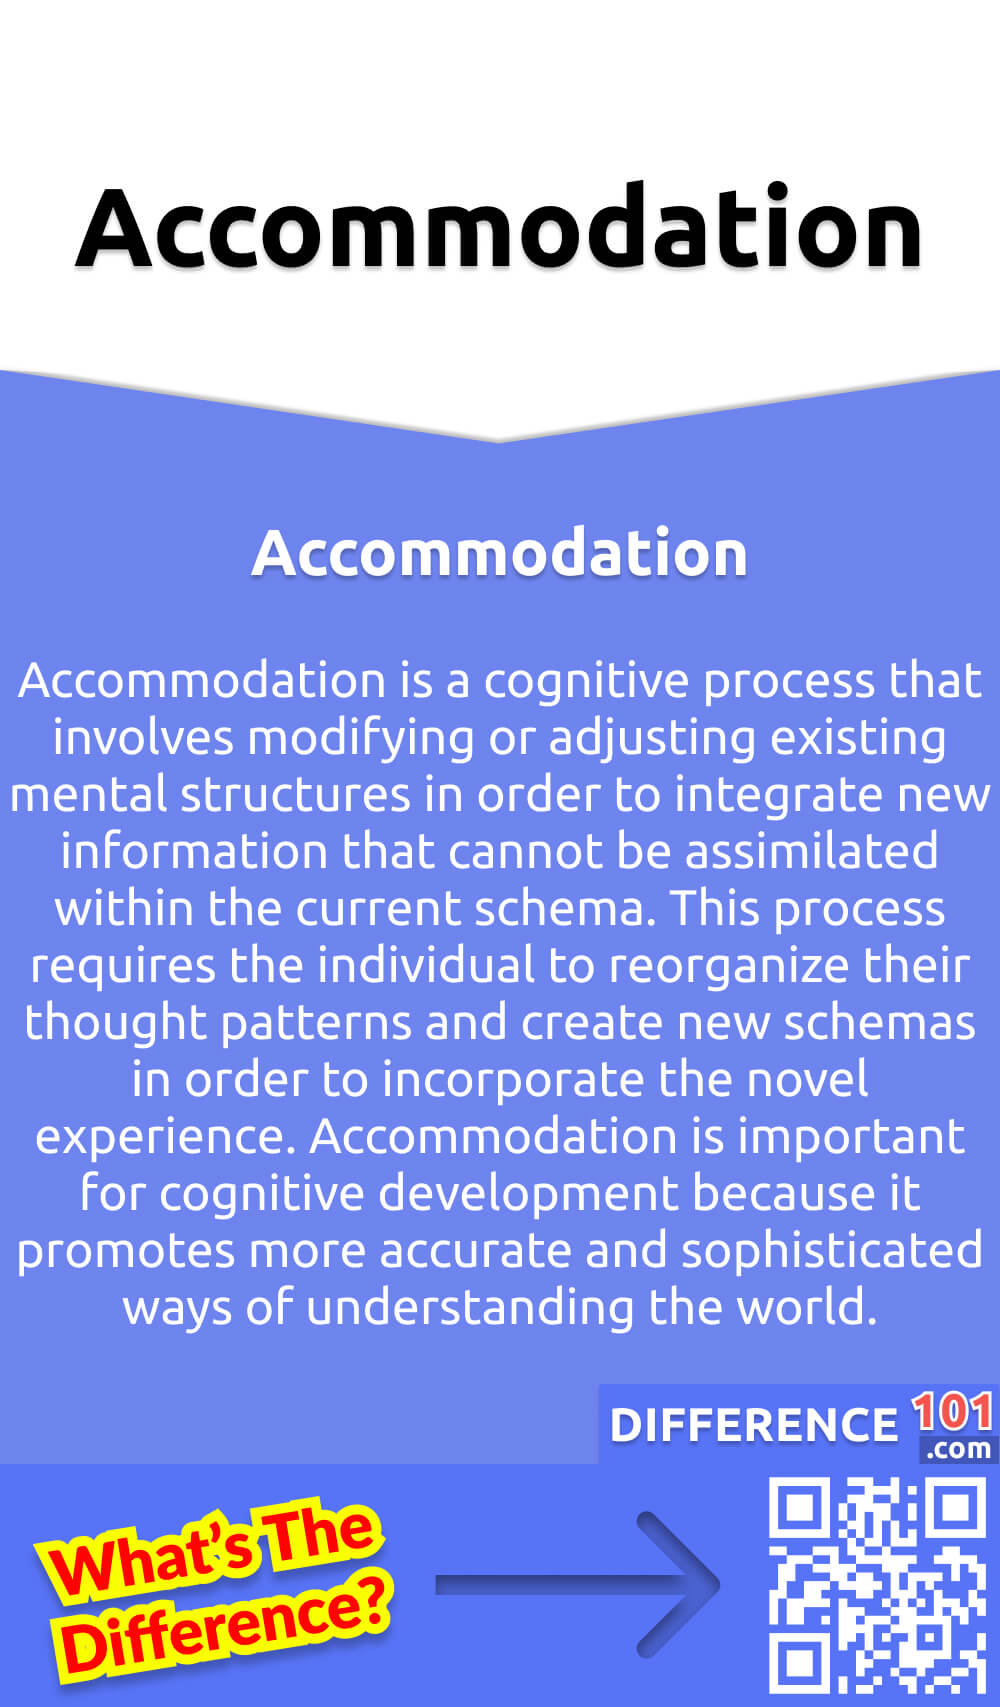 What Is Accommodation? Accommodation is a cognitive process that involves modifying or adjusting existing mental structures in order to integrate new information that cannot be assimilated within the current schema. This process requires the individual to reorganize their thought patterns and create new schemas in order to incorporate the novel experience. Accommodation is important for cognitive development because it promotes more accurate and sophisticated ways of understanding the world. By allowing individuals to adapt to new and complex situations, accommodation helps to broaden their mental frameworks and enable them to better comprehend and interact with their environment. Thus, accommodation plays a crucial role in shaping an individual's cognitive development and facilitating their ability to learn and grow.